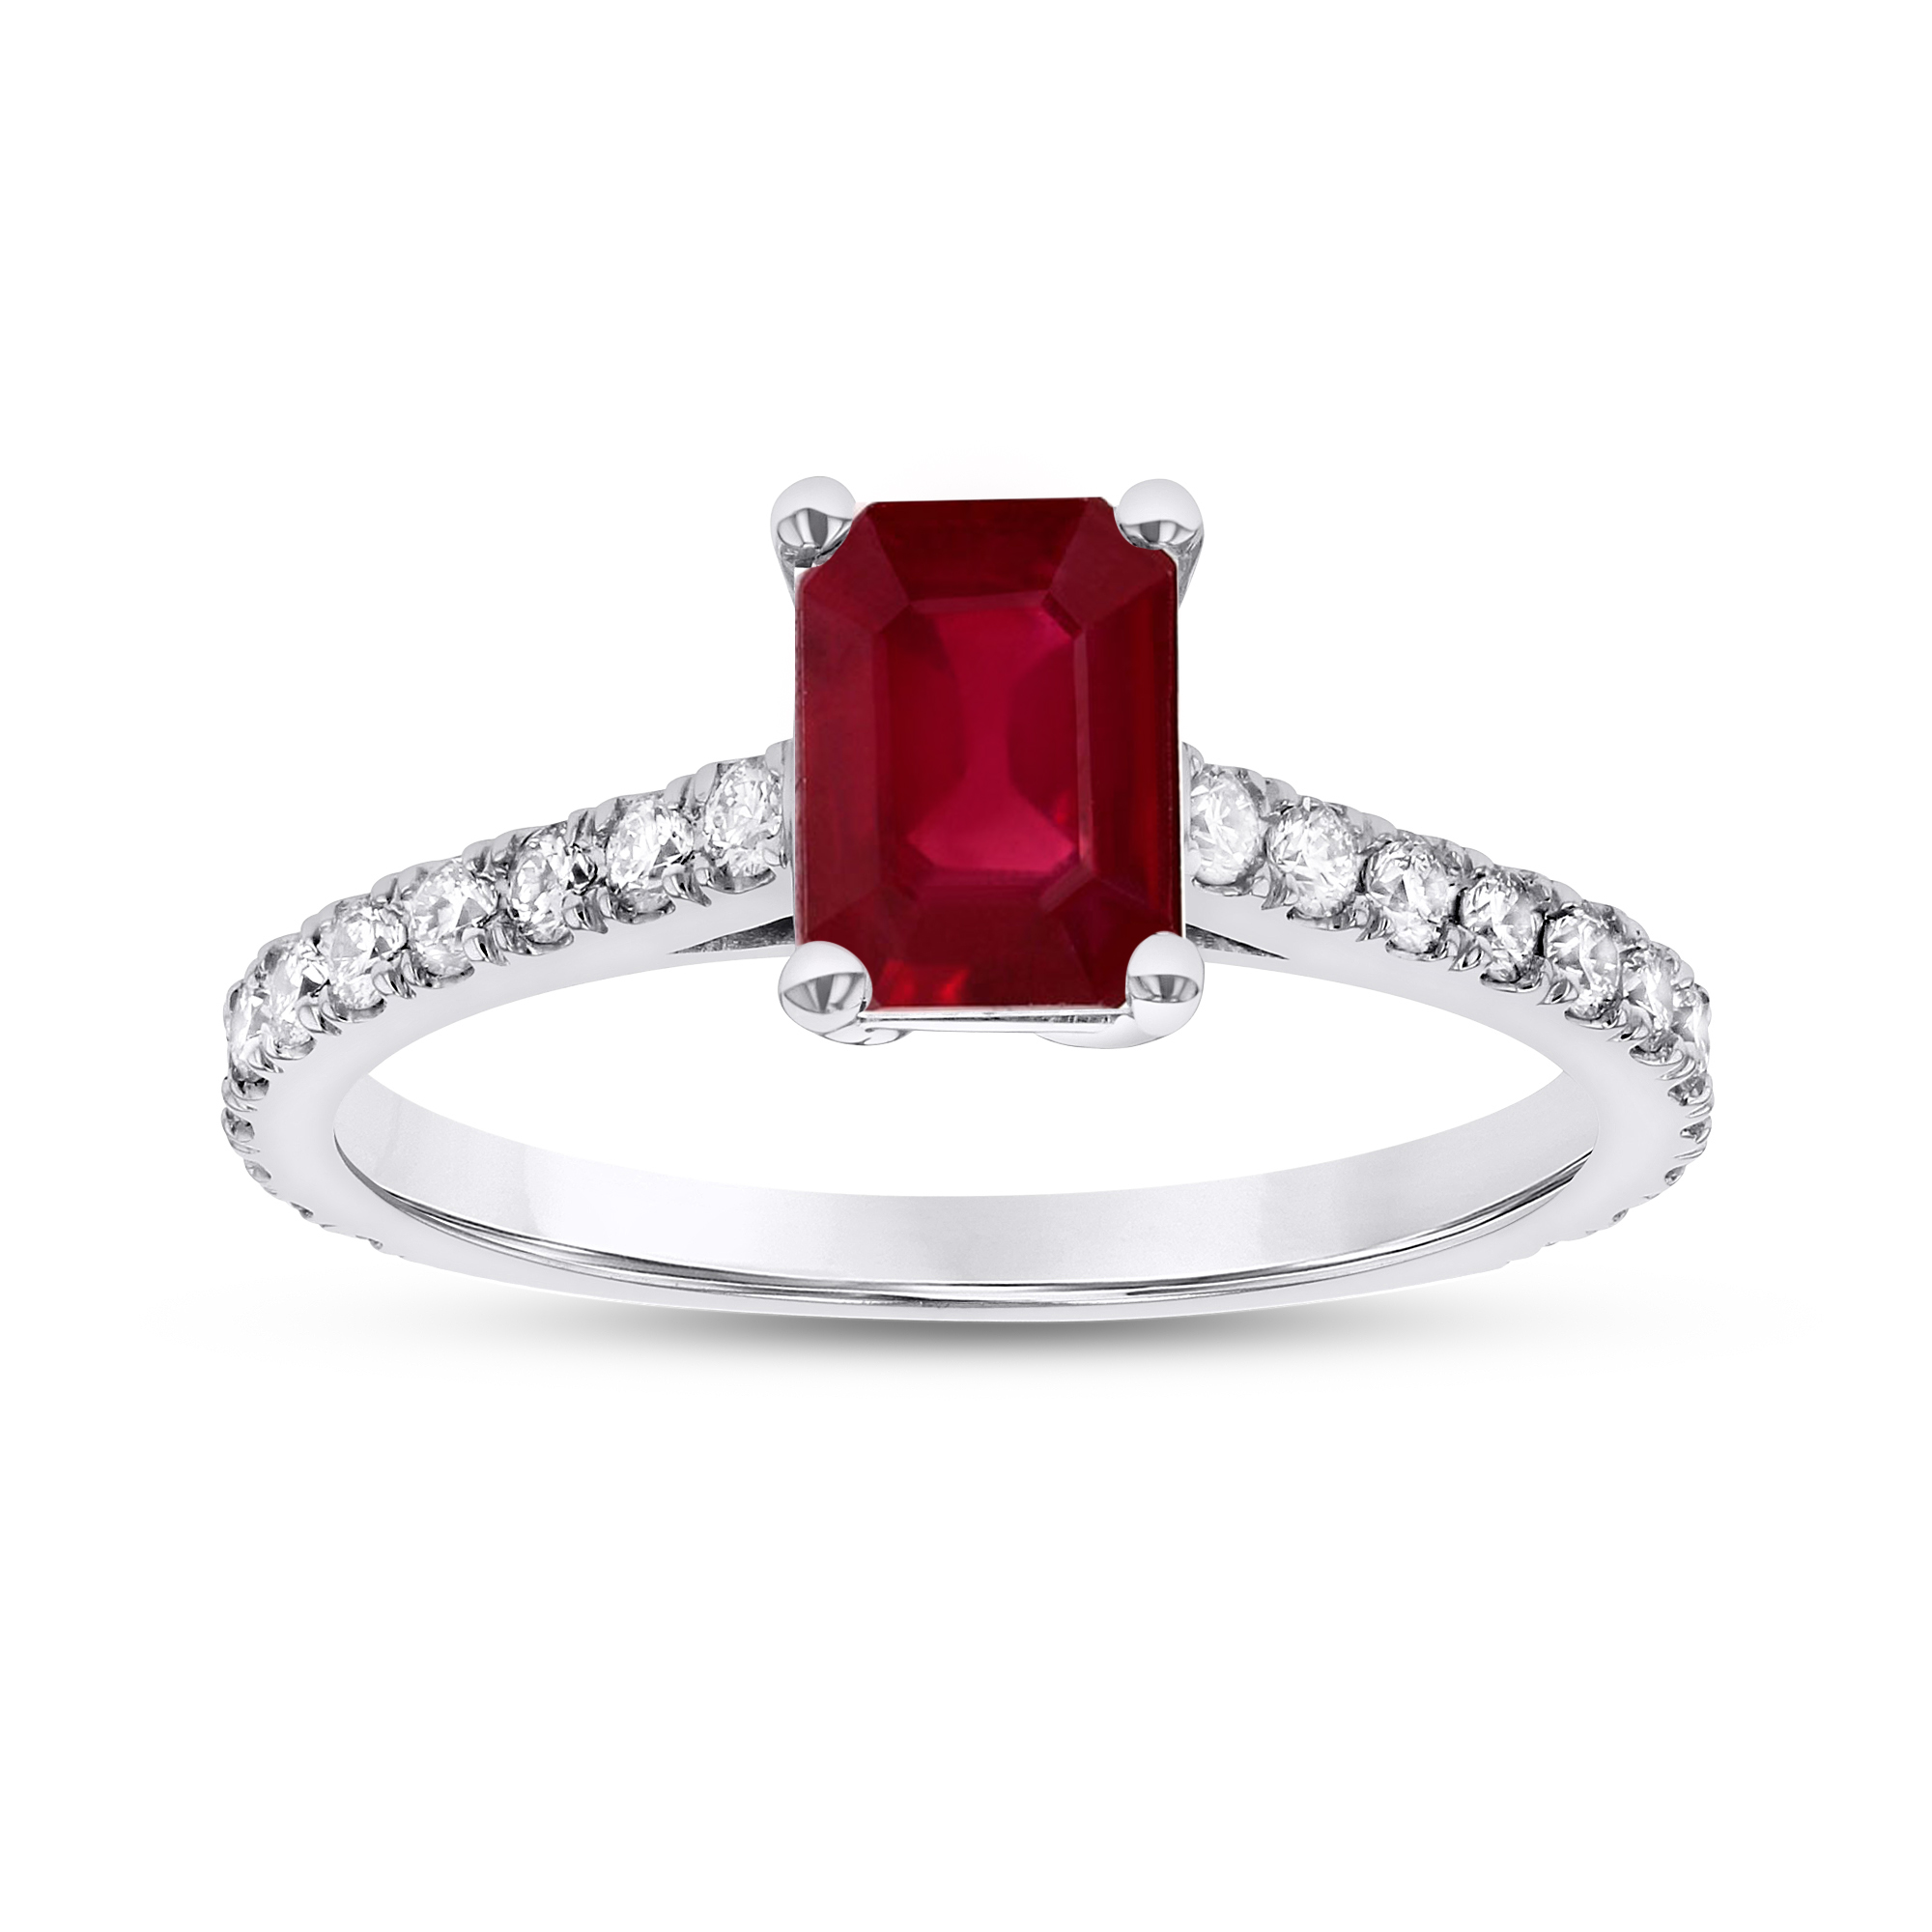 0.36ctw Diamond and Emerald Cut Ruby Engagement Ring in 14k White Gold